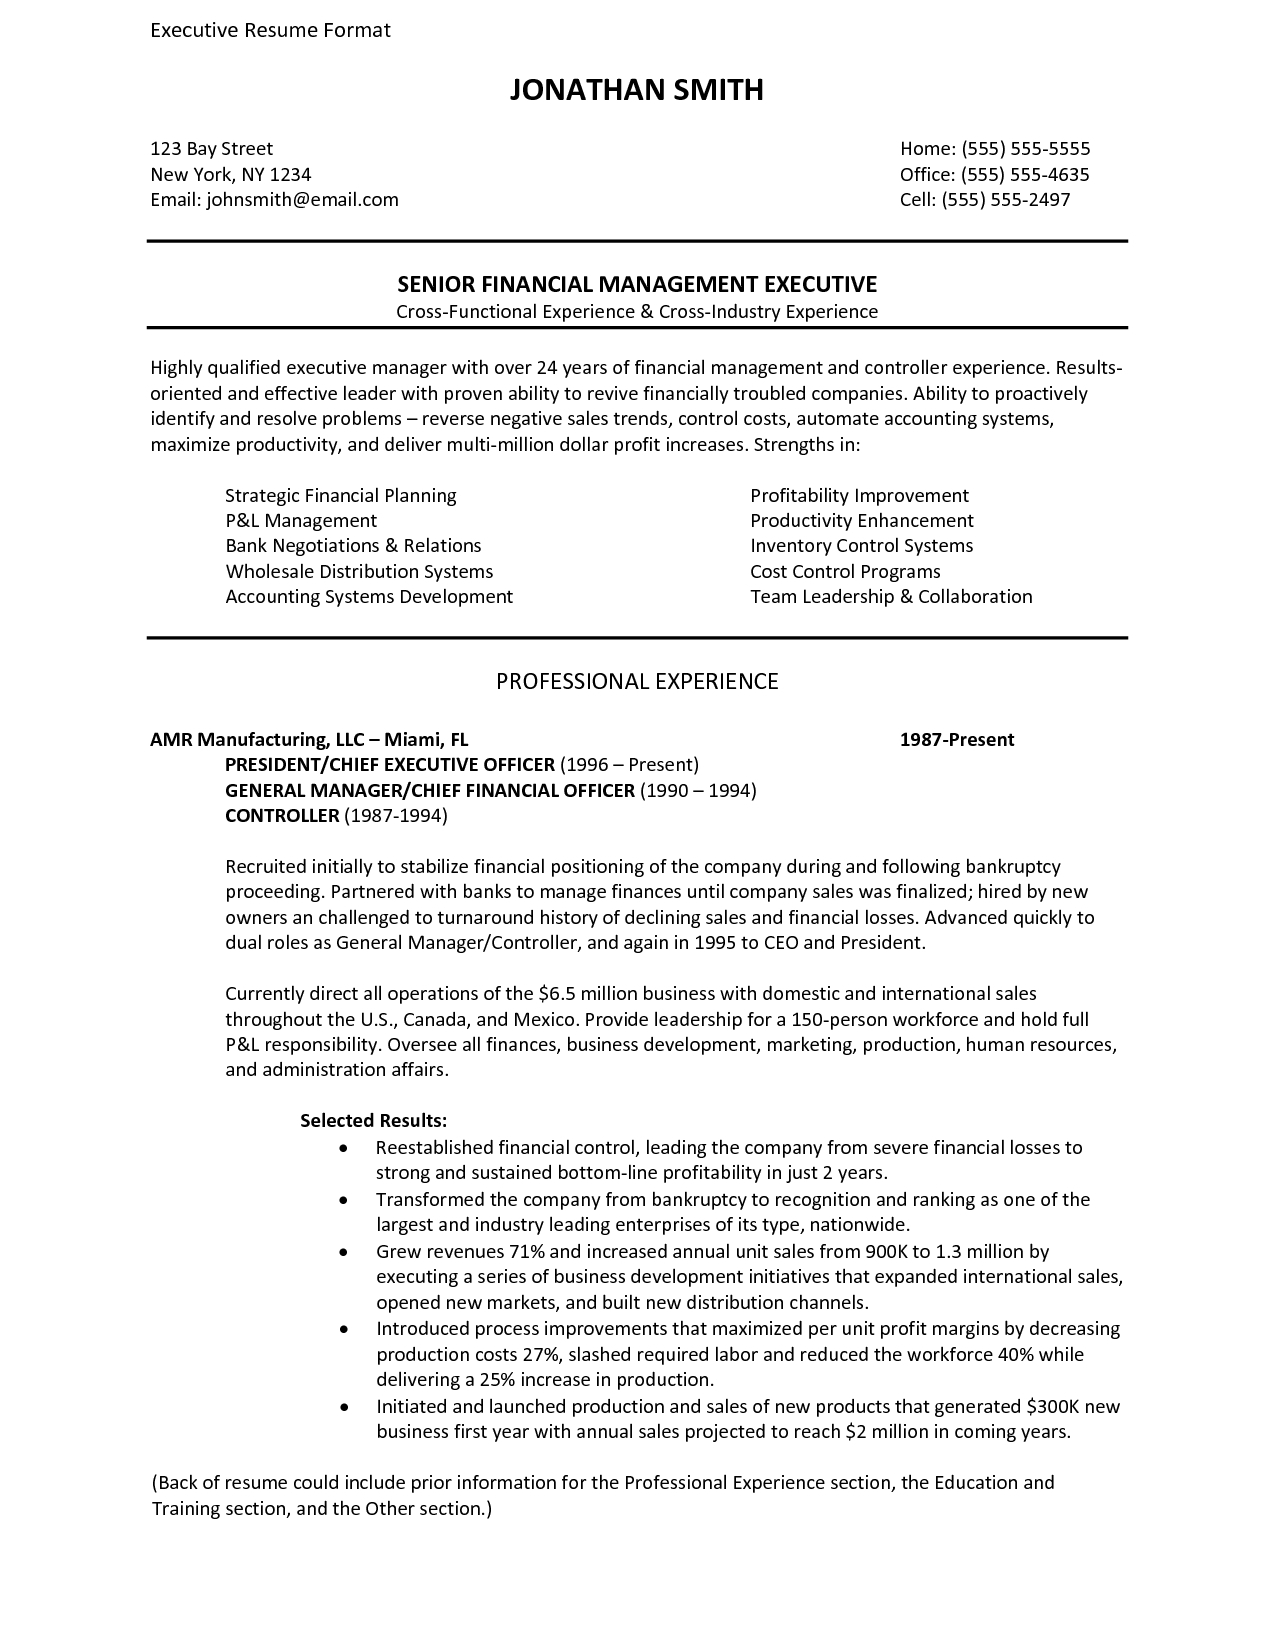 executive resume format cover letter